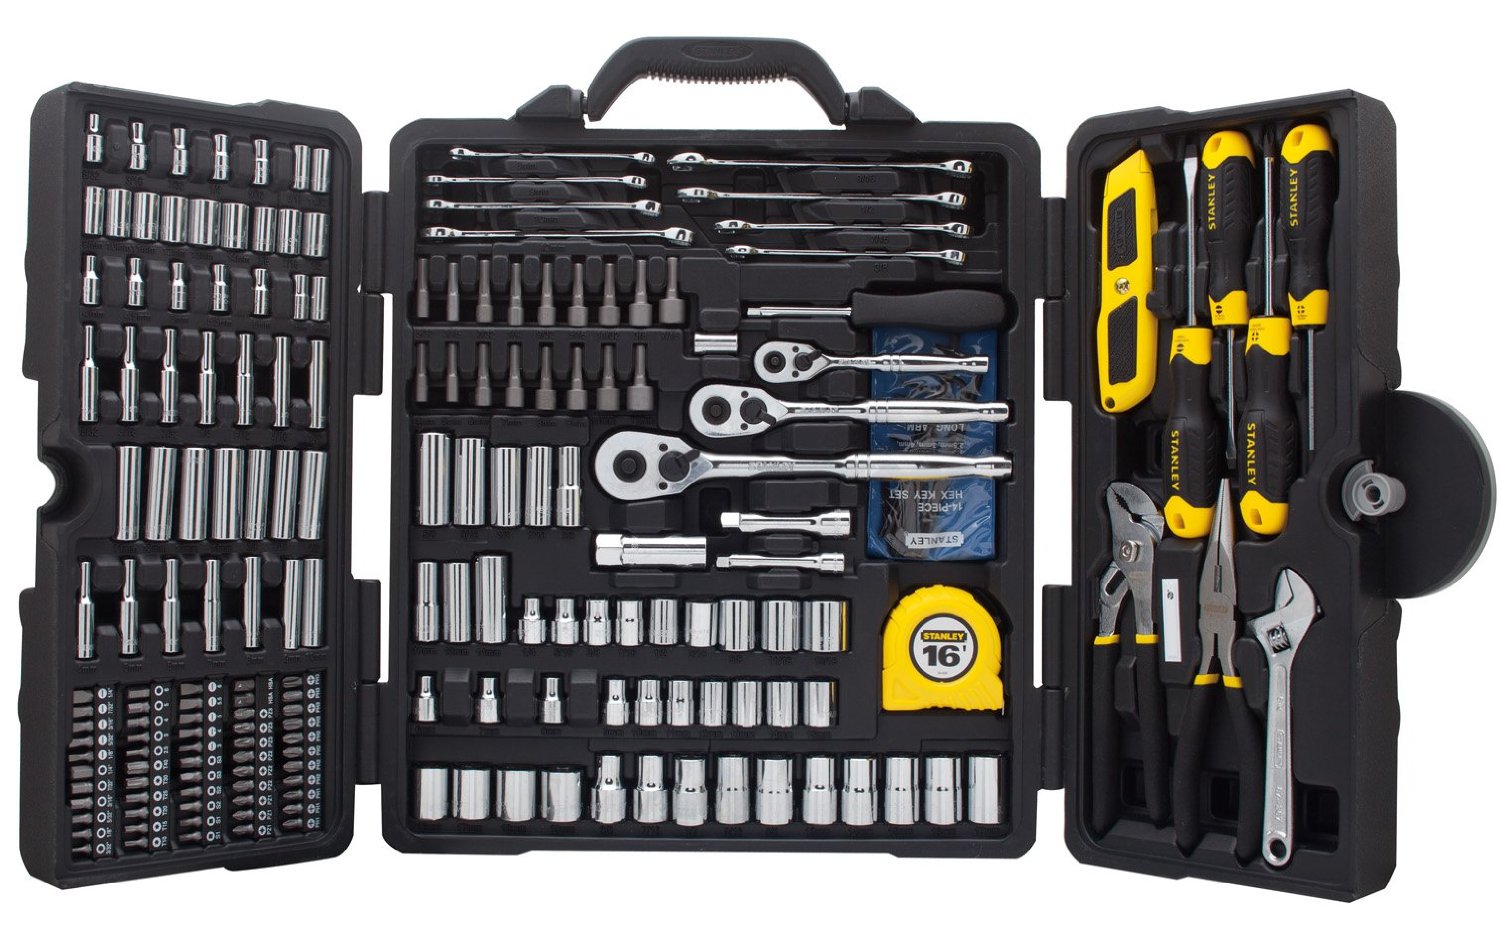 Save 24% on the Best-Selling Stanley 210pc Tool Set! Just $74.99!